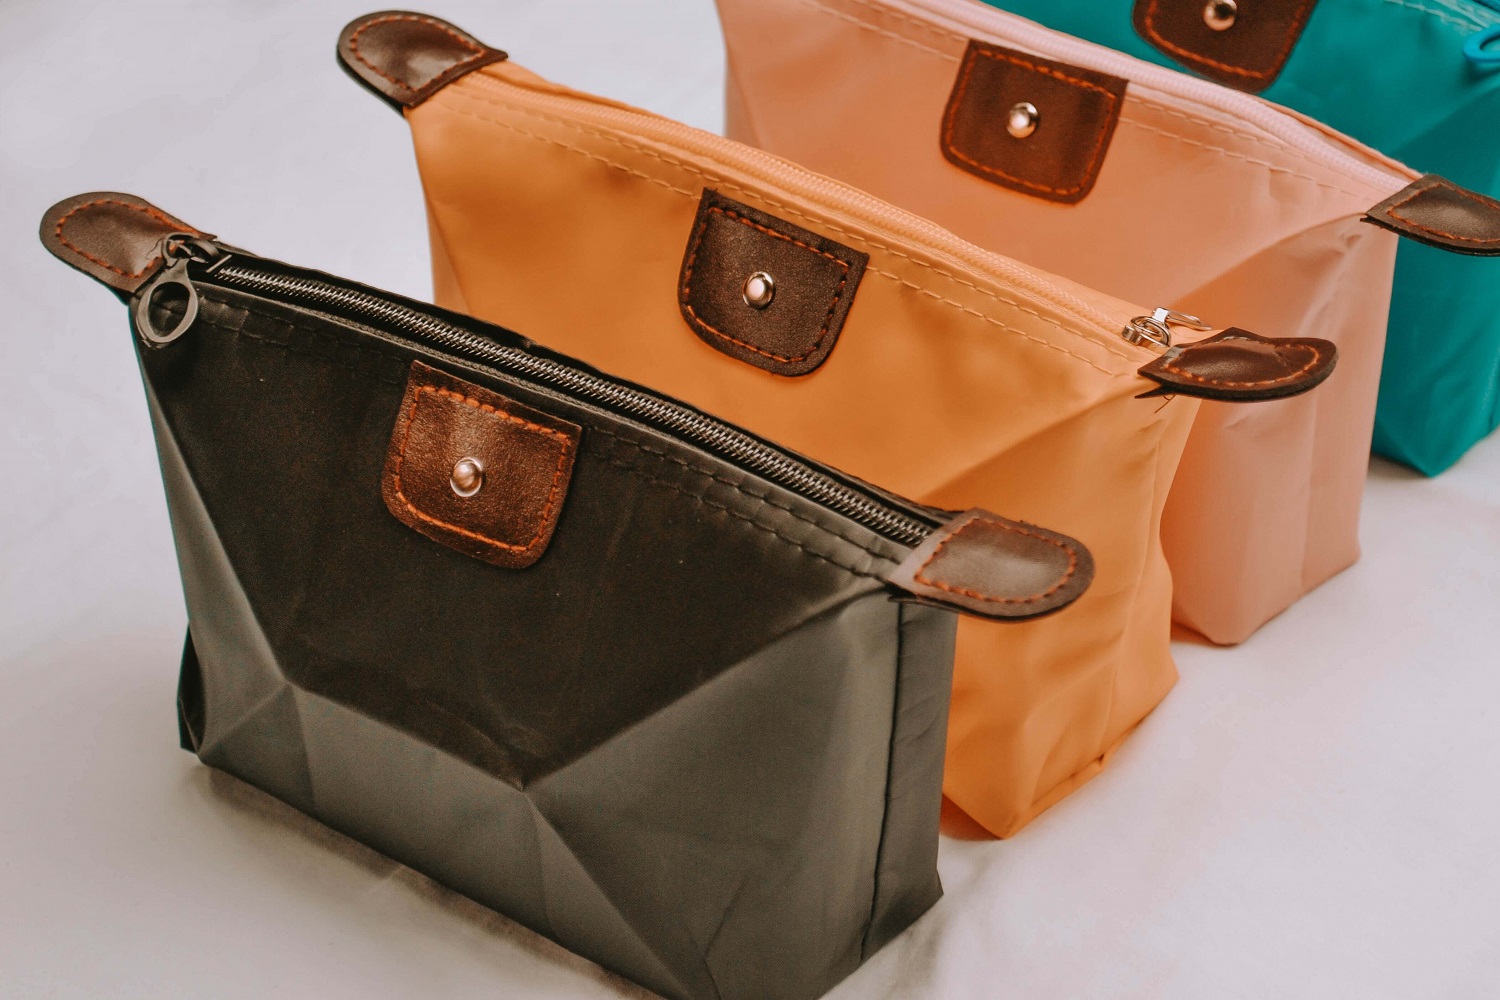 5 Reasons Your Growing Boutique Should Sell Women's Handbags